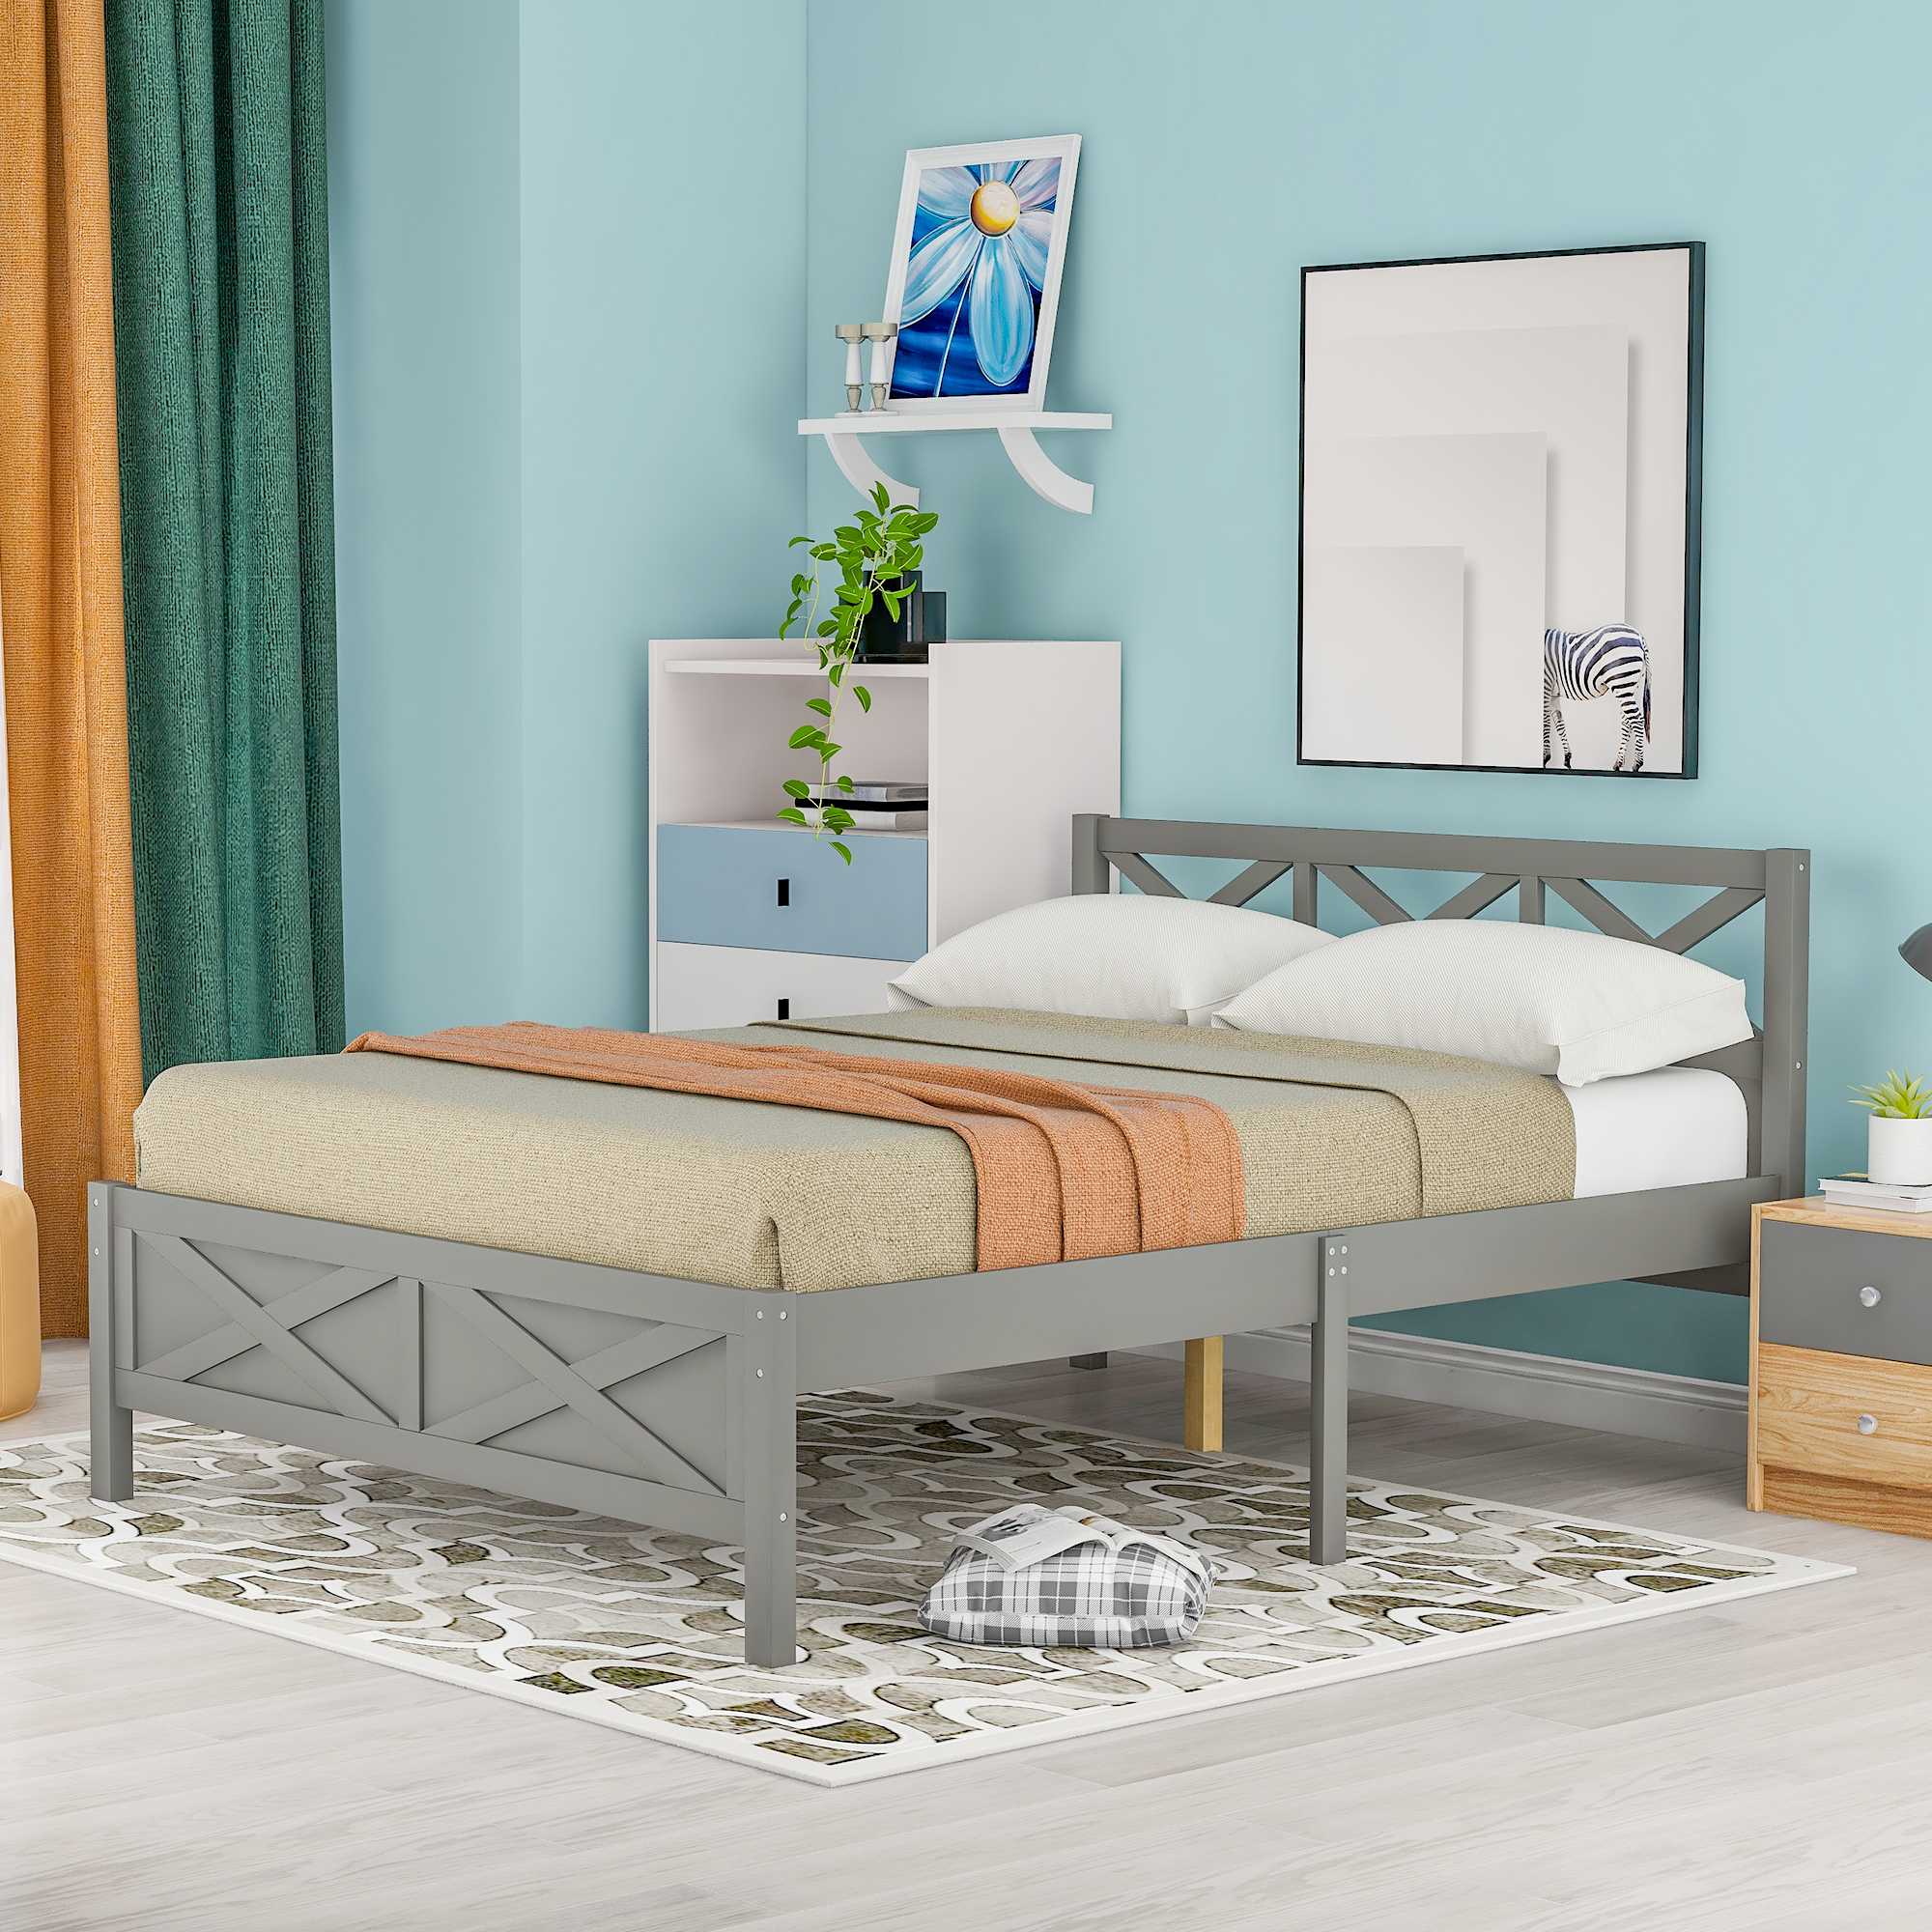 Queen Size Wooden Platform Bed with Extra Support Legs, X-shaped Frame, Gray（New）-Boyel Living